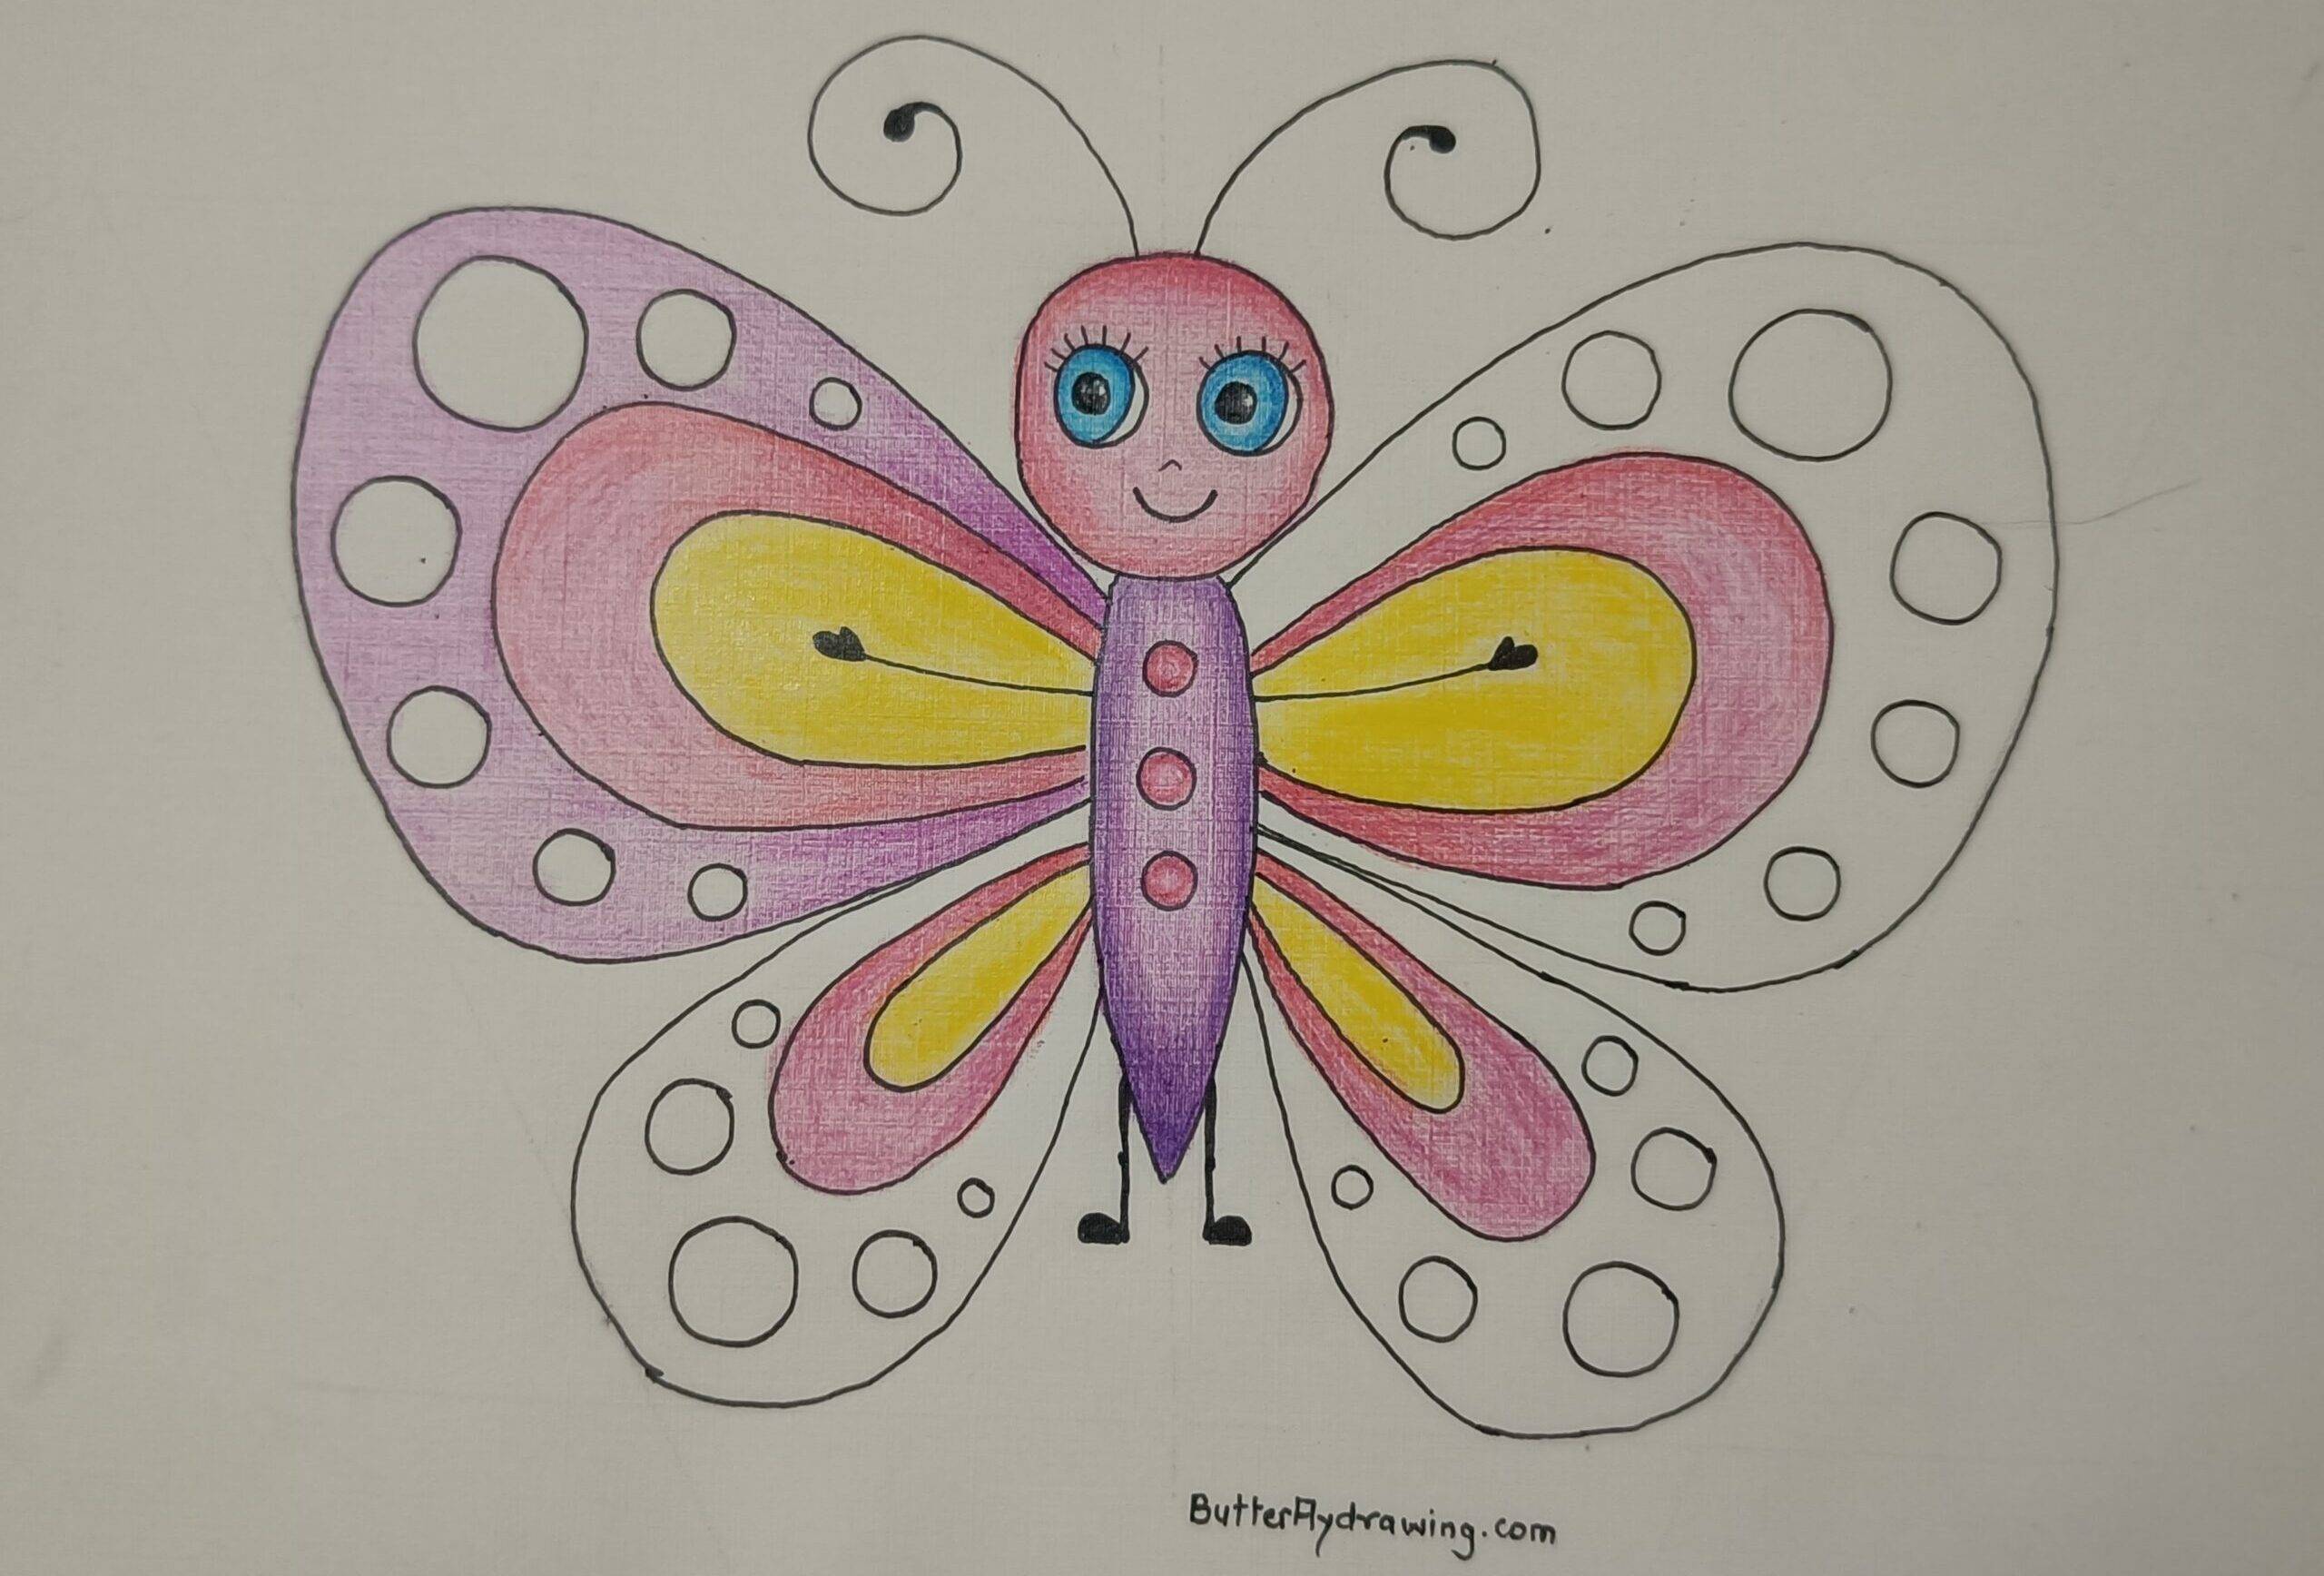 Colourful Butterfly Drawing for Kids